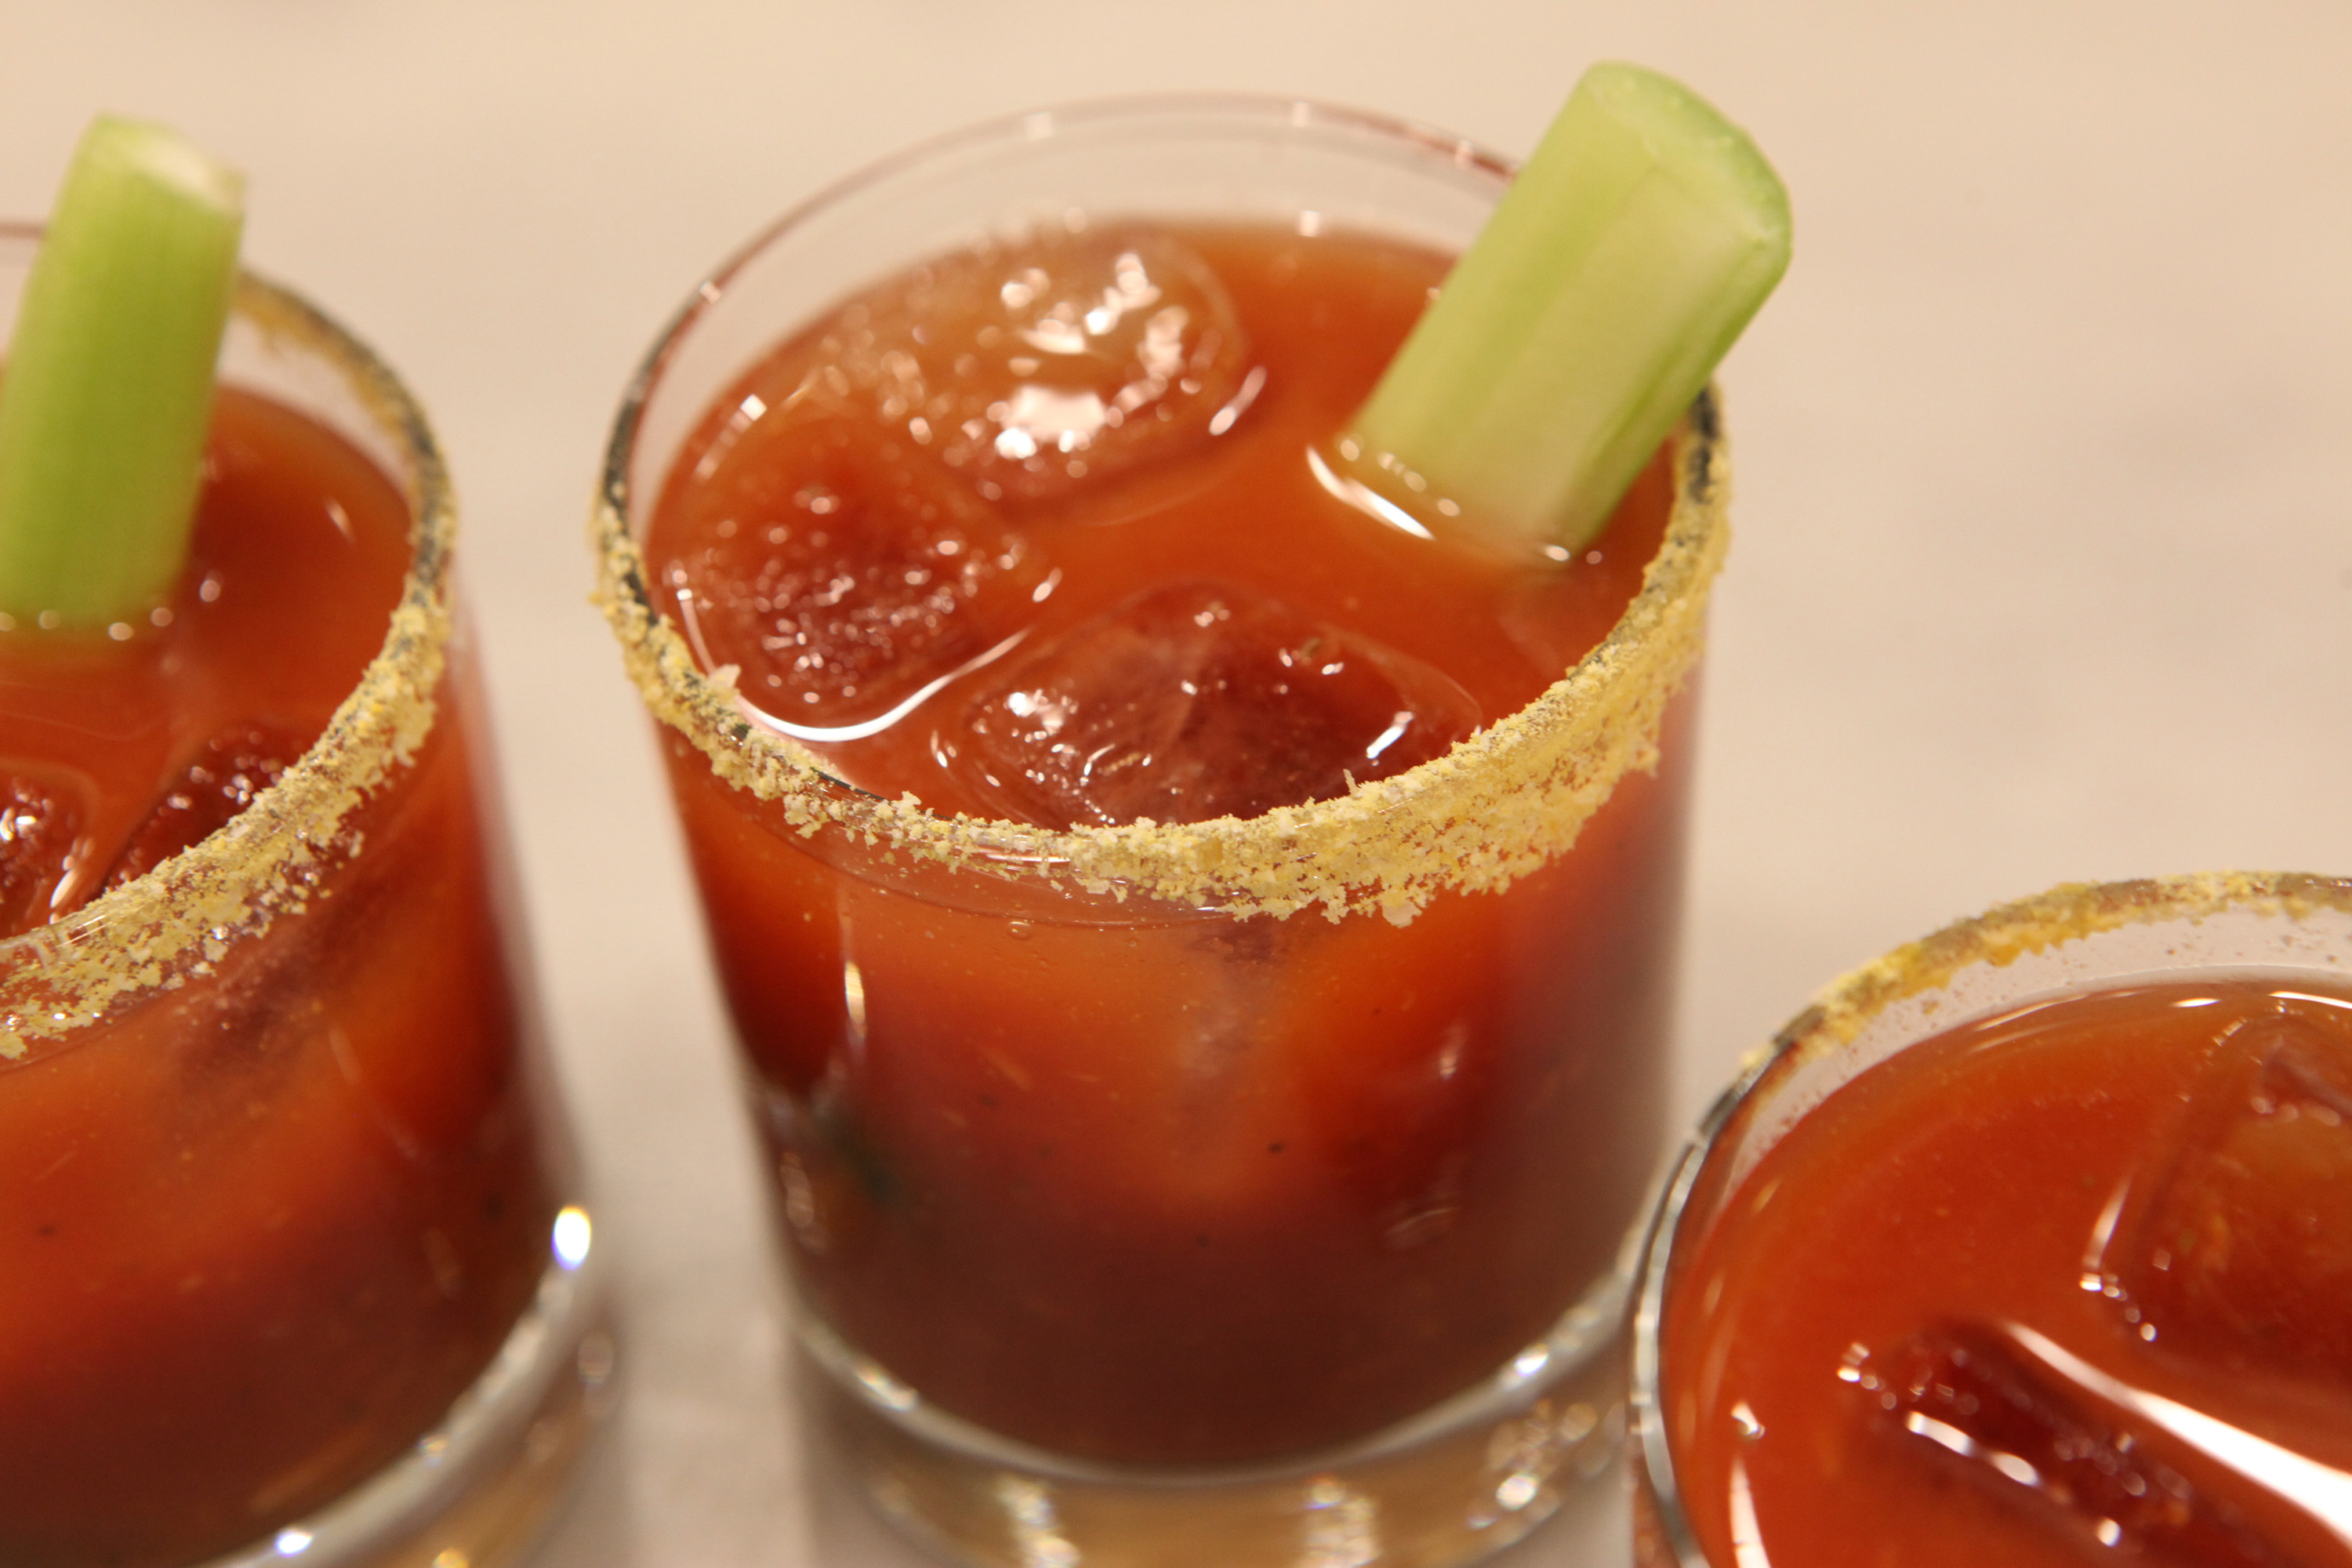 Colman’s Mustard Bloody Mary Cocktail Recipes with vodka